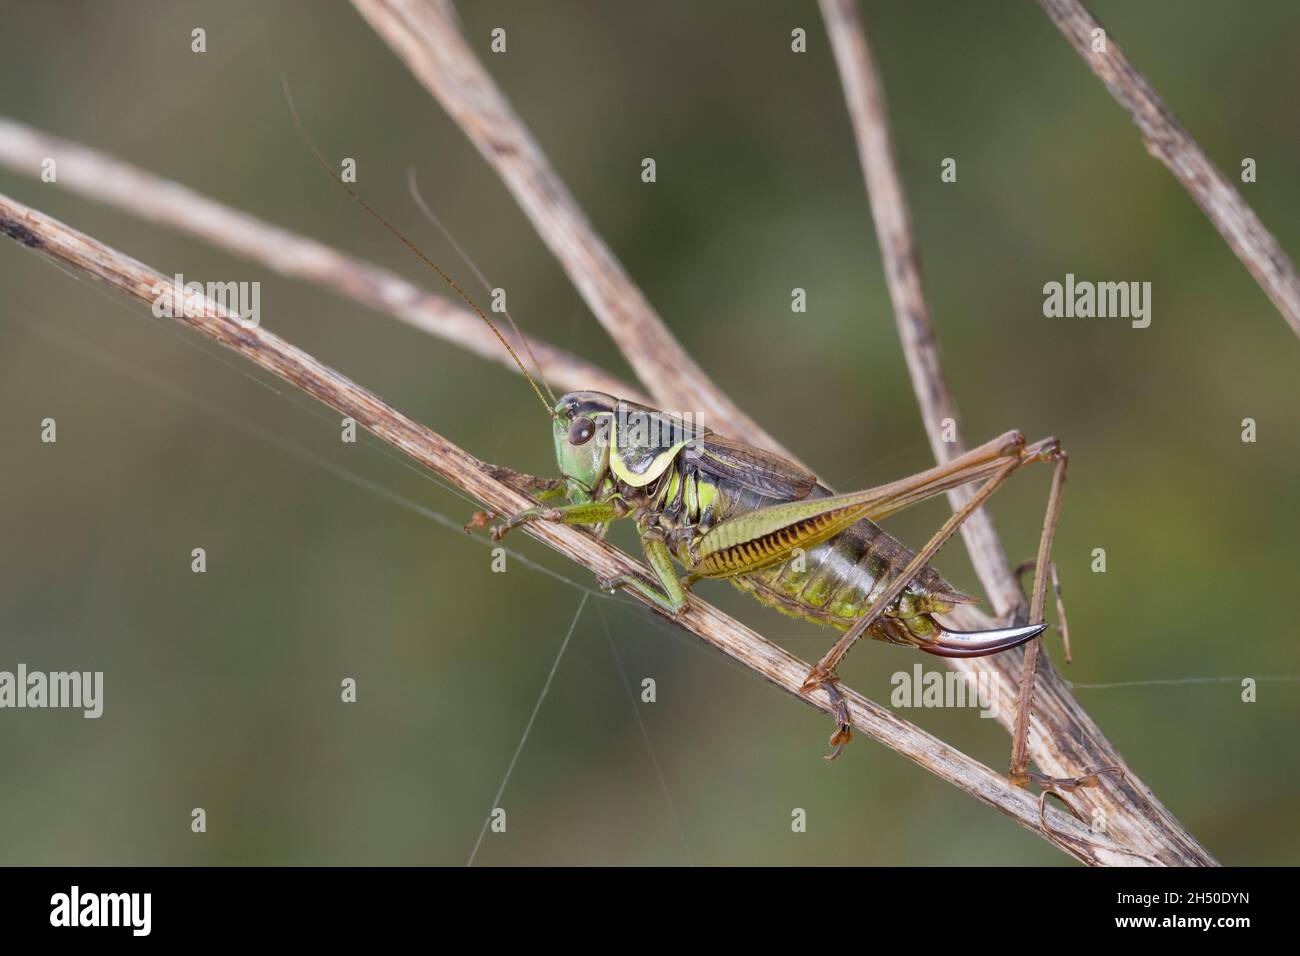 Roesels Beißschrecke, Rösels Beißschrecke, Roesels Beissschrecke, Weibchen, Roeseliana roeselii, Metrioptera roeselii, Roesel's bush cricket, Roesel's Stock Photo